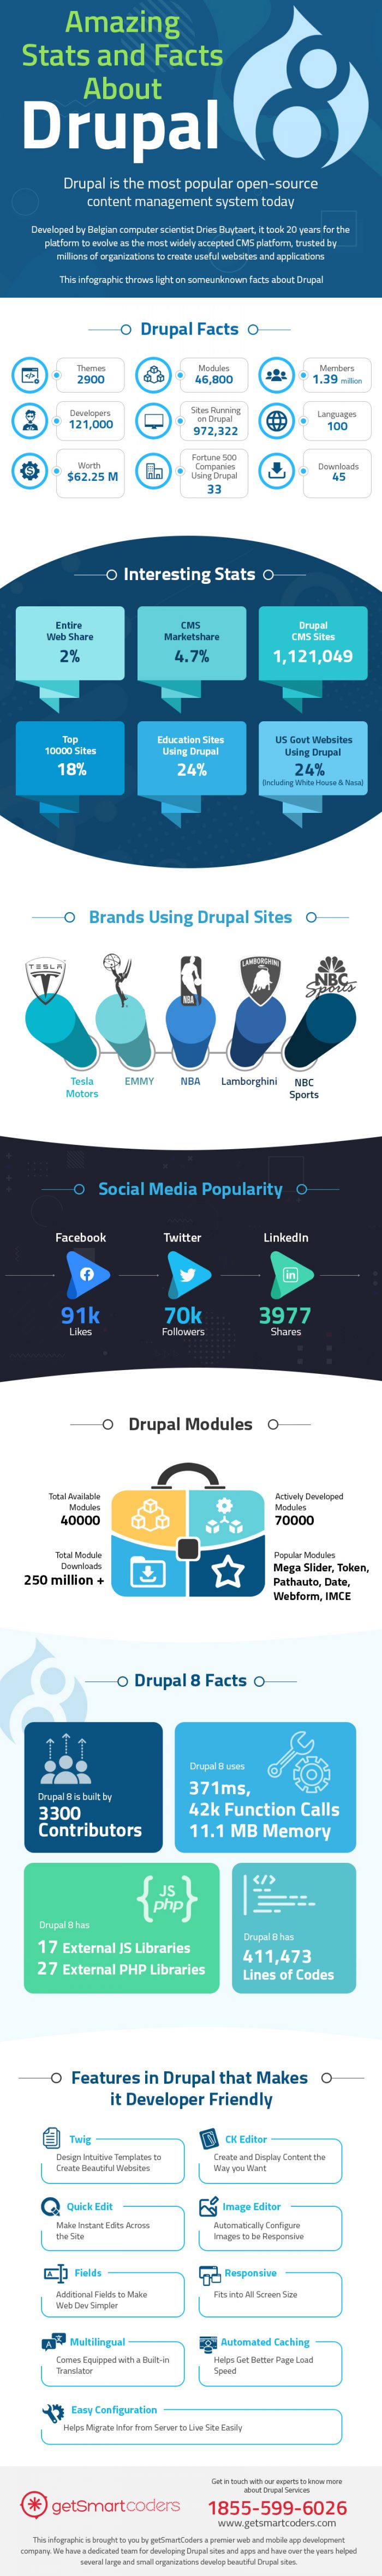 Amazing Stats and Facts About Drupal